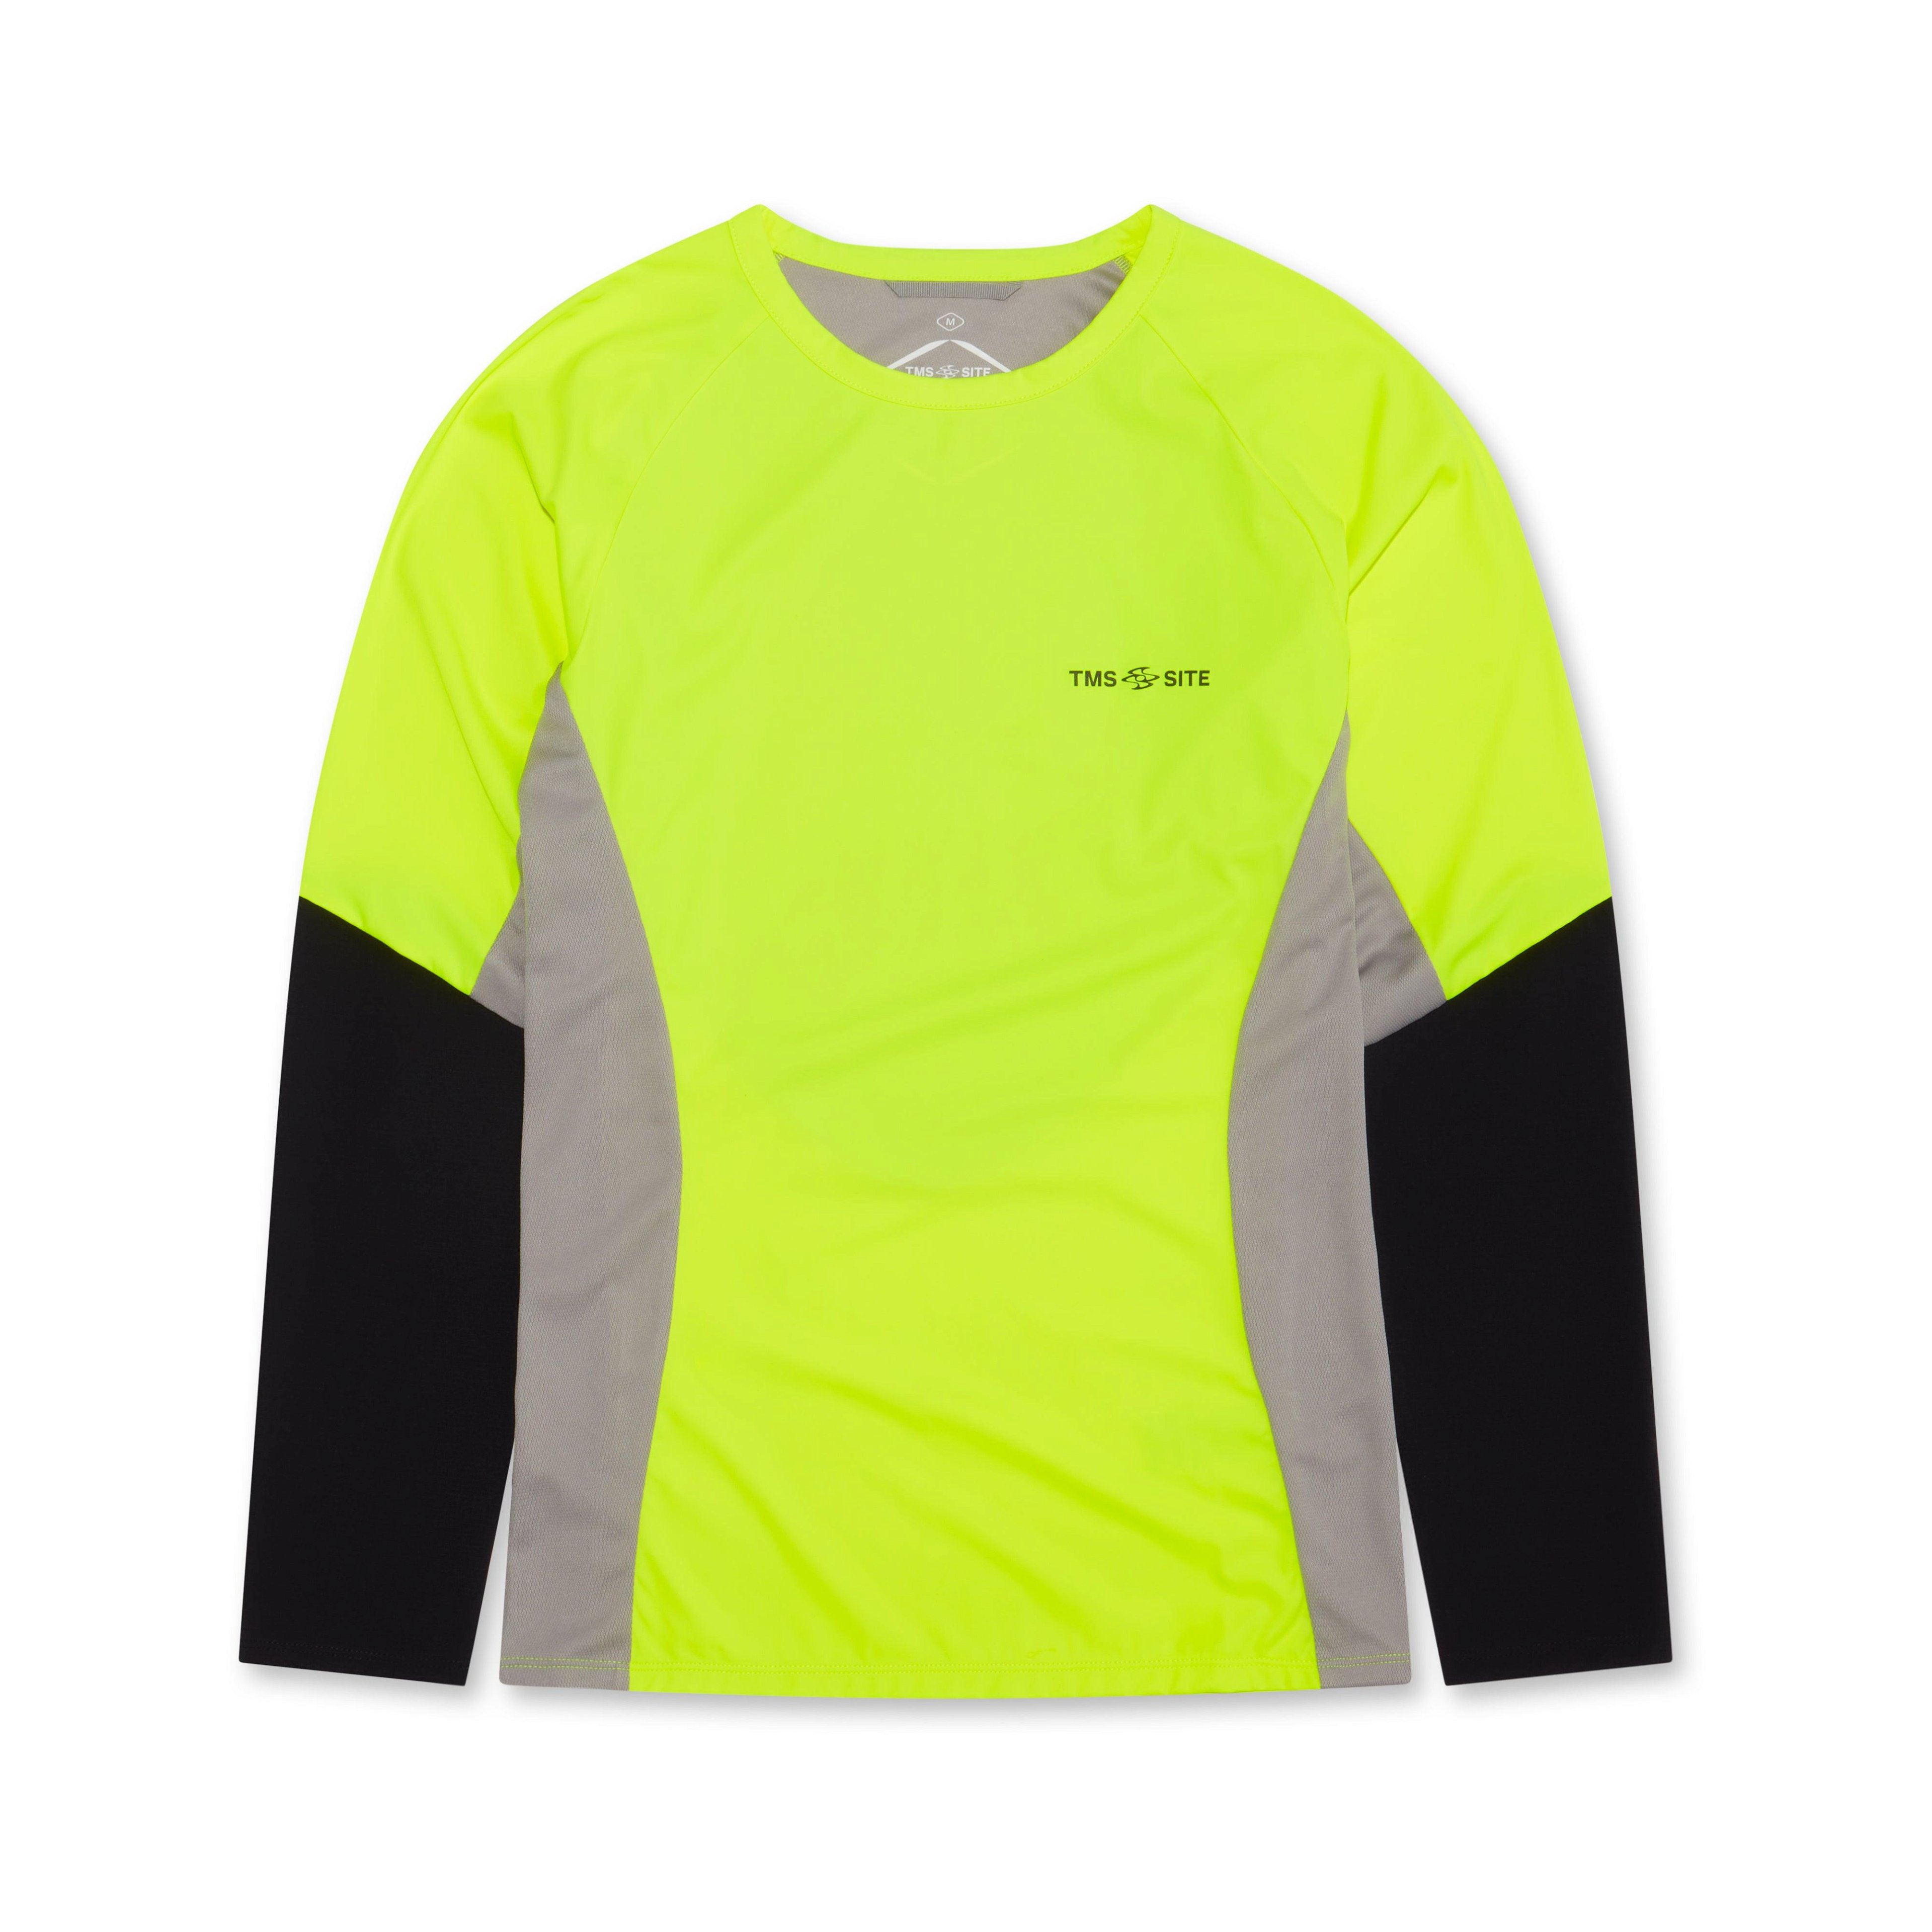 Tms.Site - Men's UV Resist Tested To Work Long - (Neon Yellow/Stone Grey) by TMS.SITE